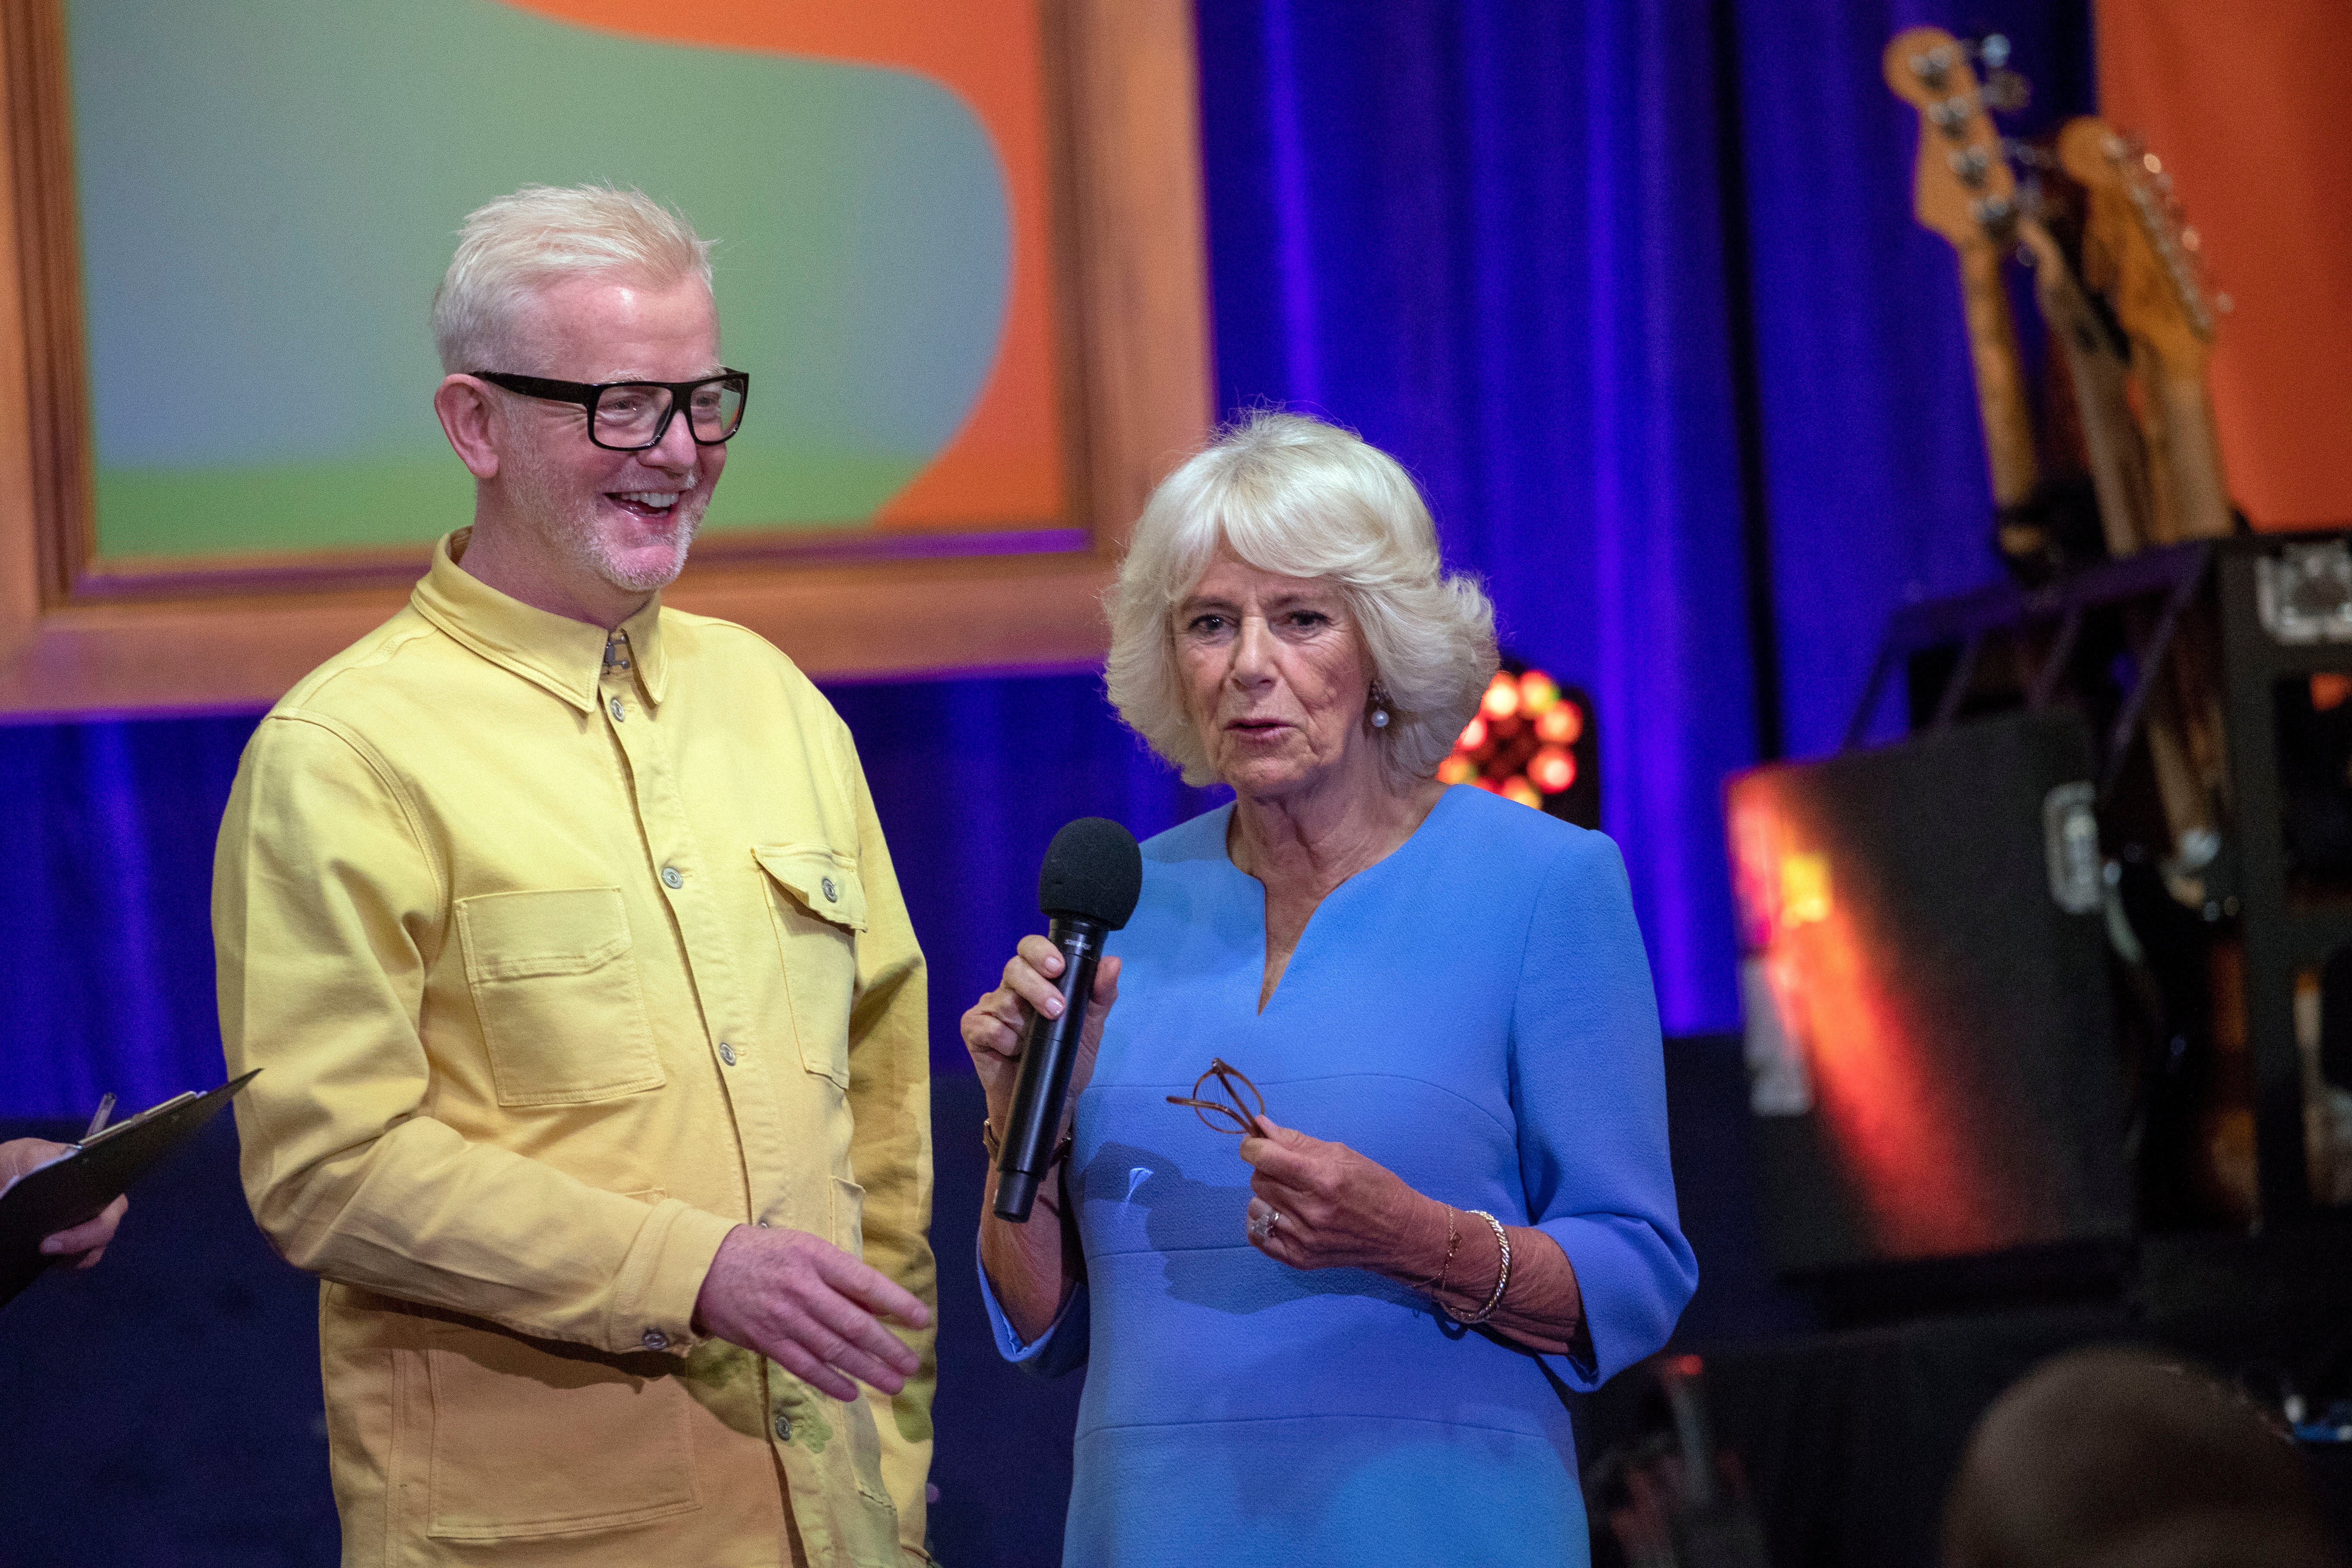 Chris Evans and Camilla, then-Duchess of Cornwall attend the live broadcast of the final of BBC Radio 2’s 500 Words creative writing competition at Windsor Castle on June 14, 2019